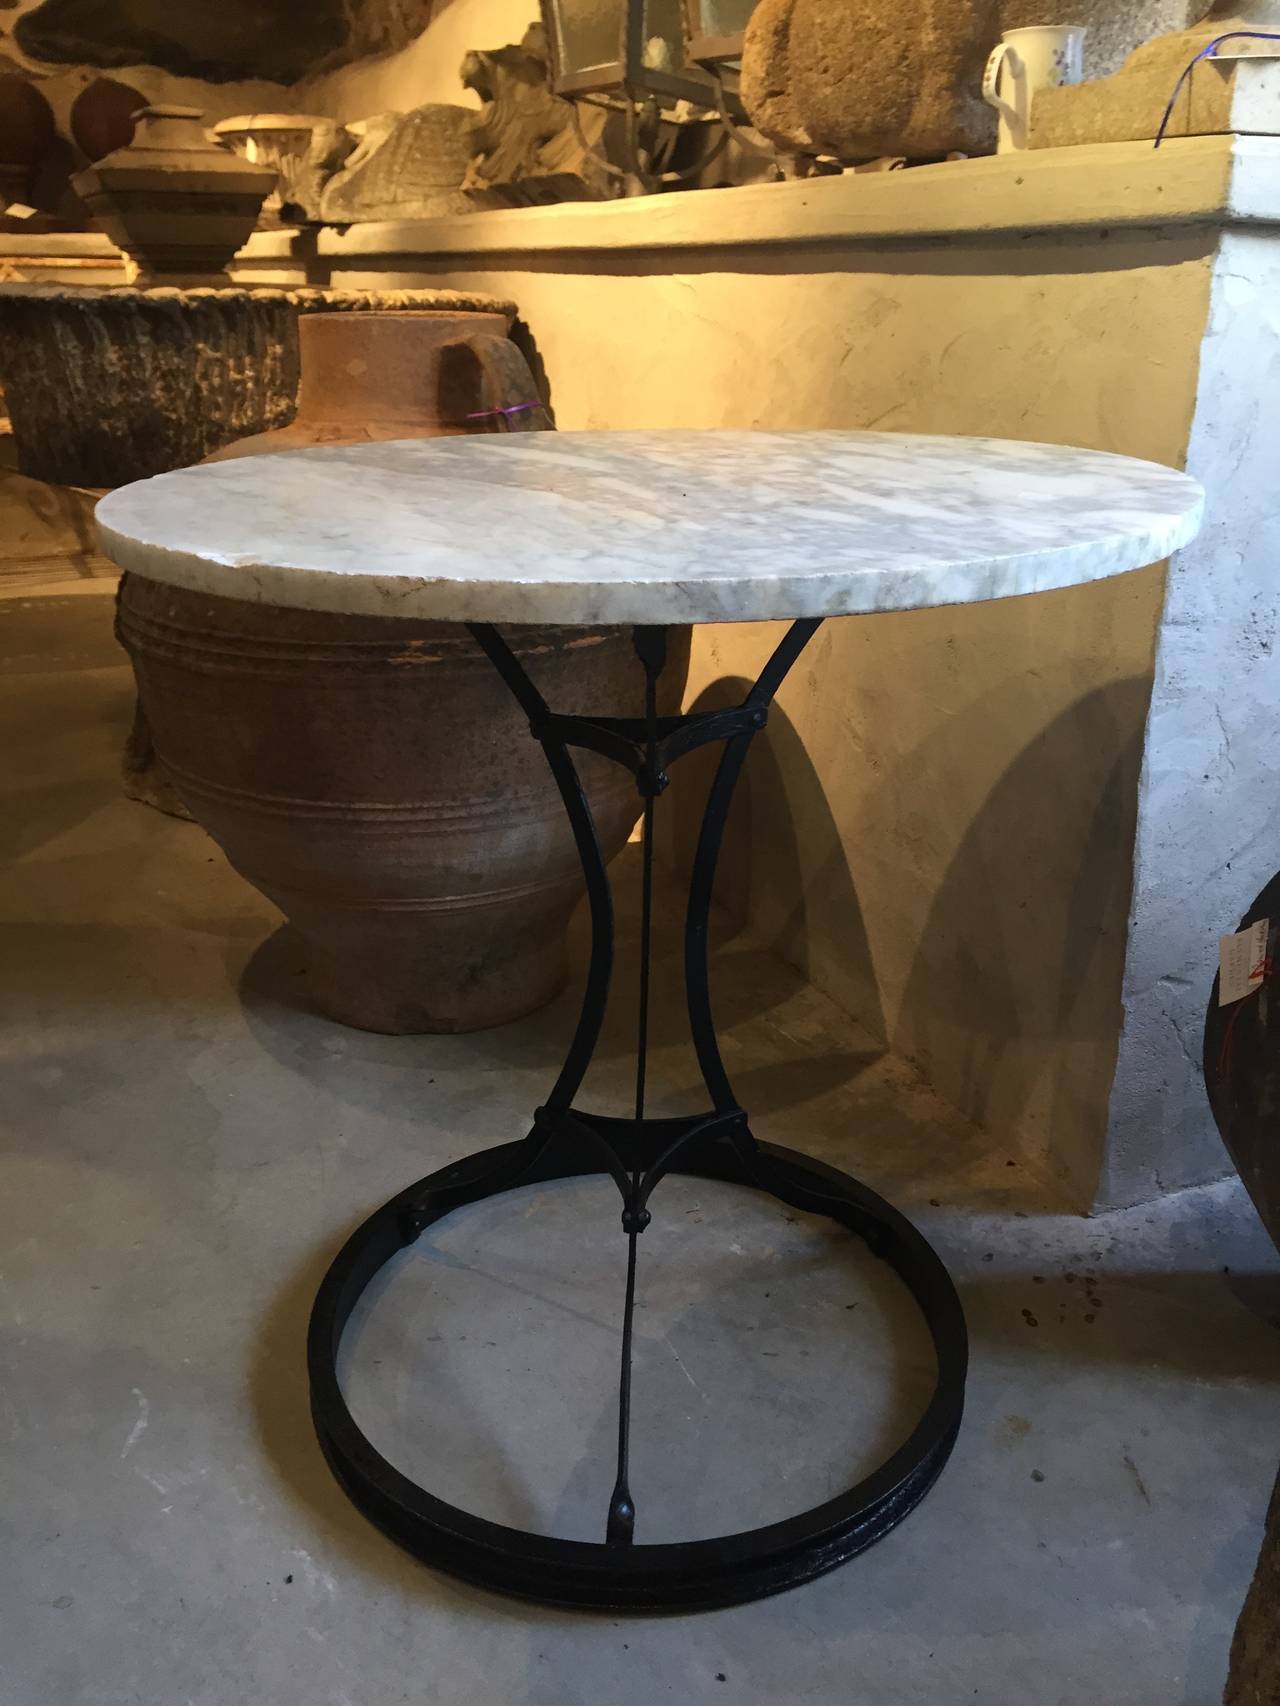 This charming French steel bistro table dates to the 1920s-1930s, but we have repainted it in satin black and added a 1